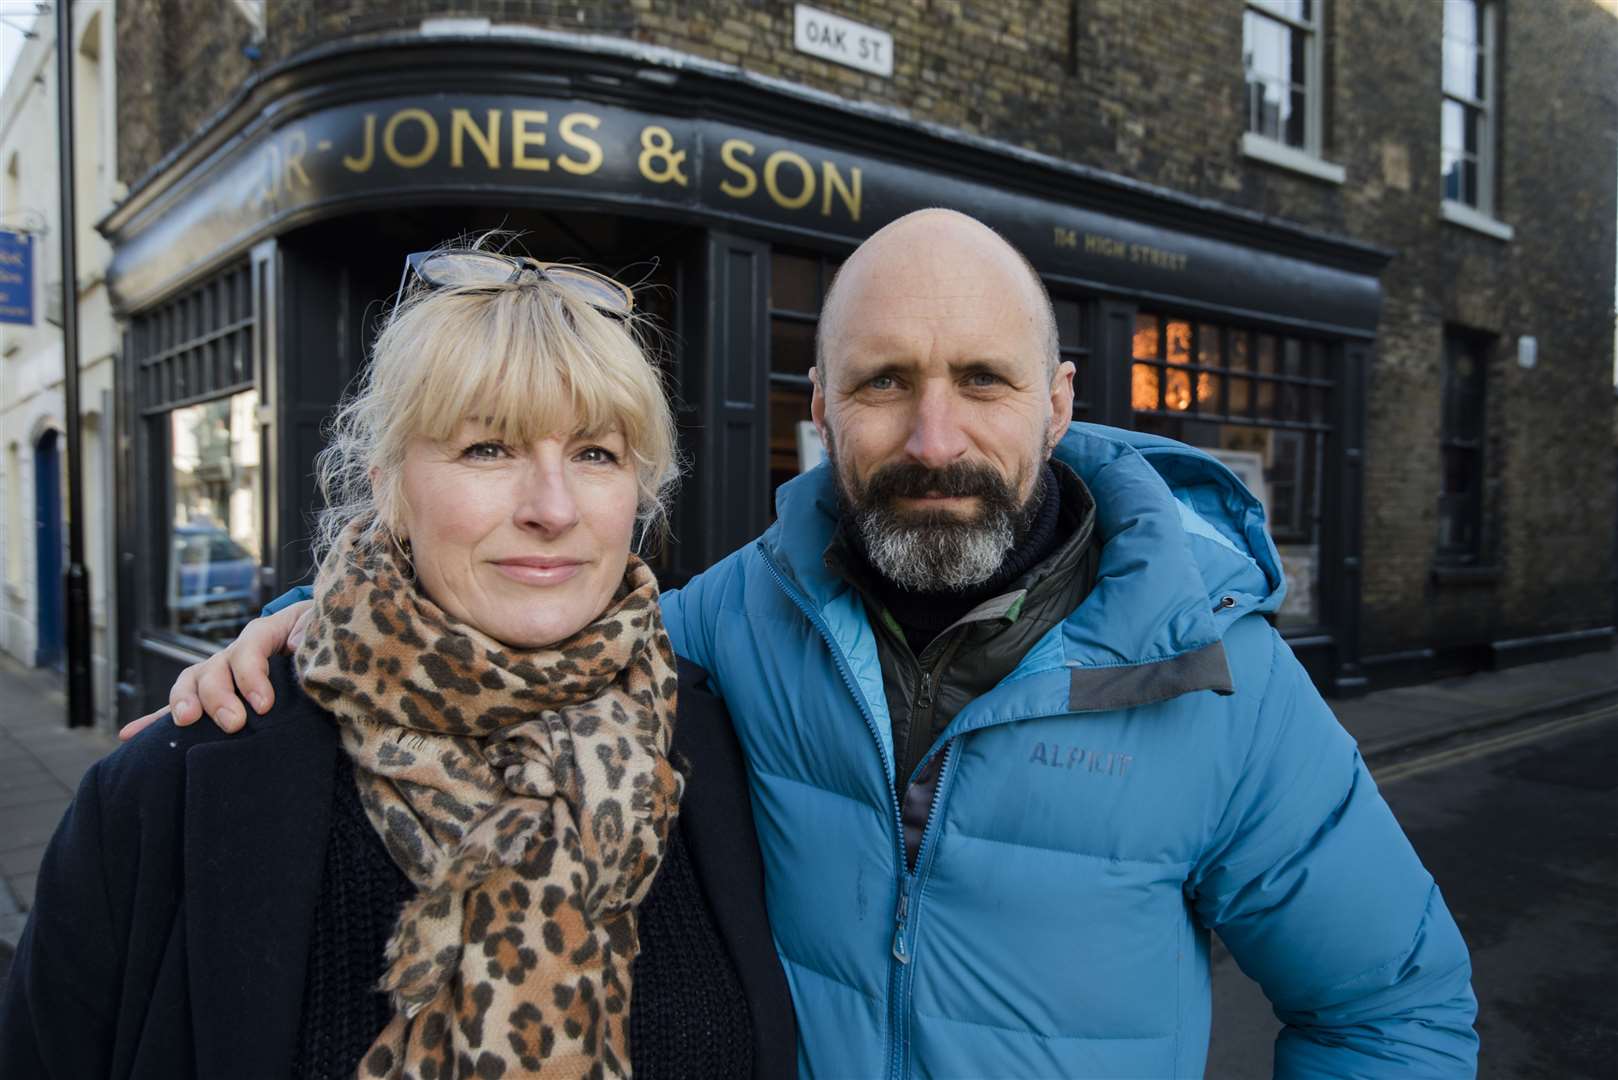 Sonja and Richard Taylor-Jones of Taylor-Jones & Son in Deal will expand their gallery into their cellar